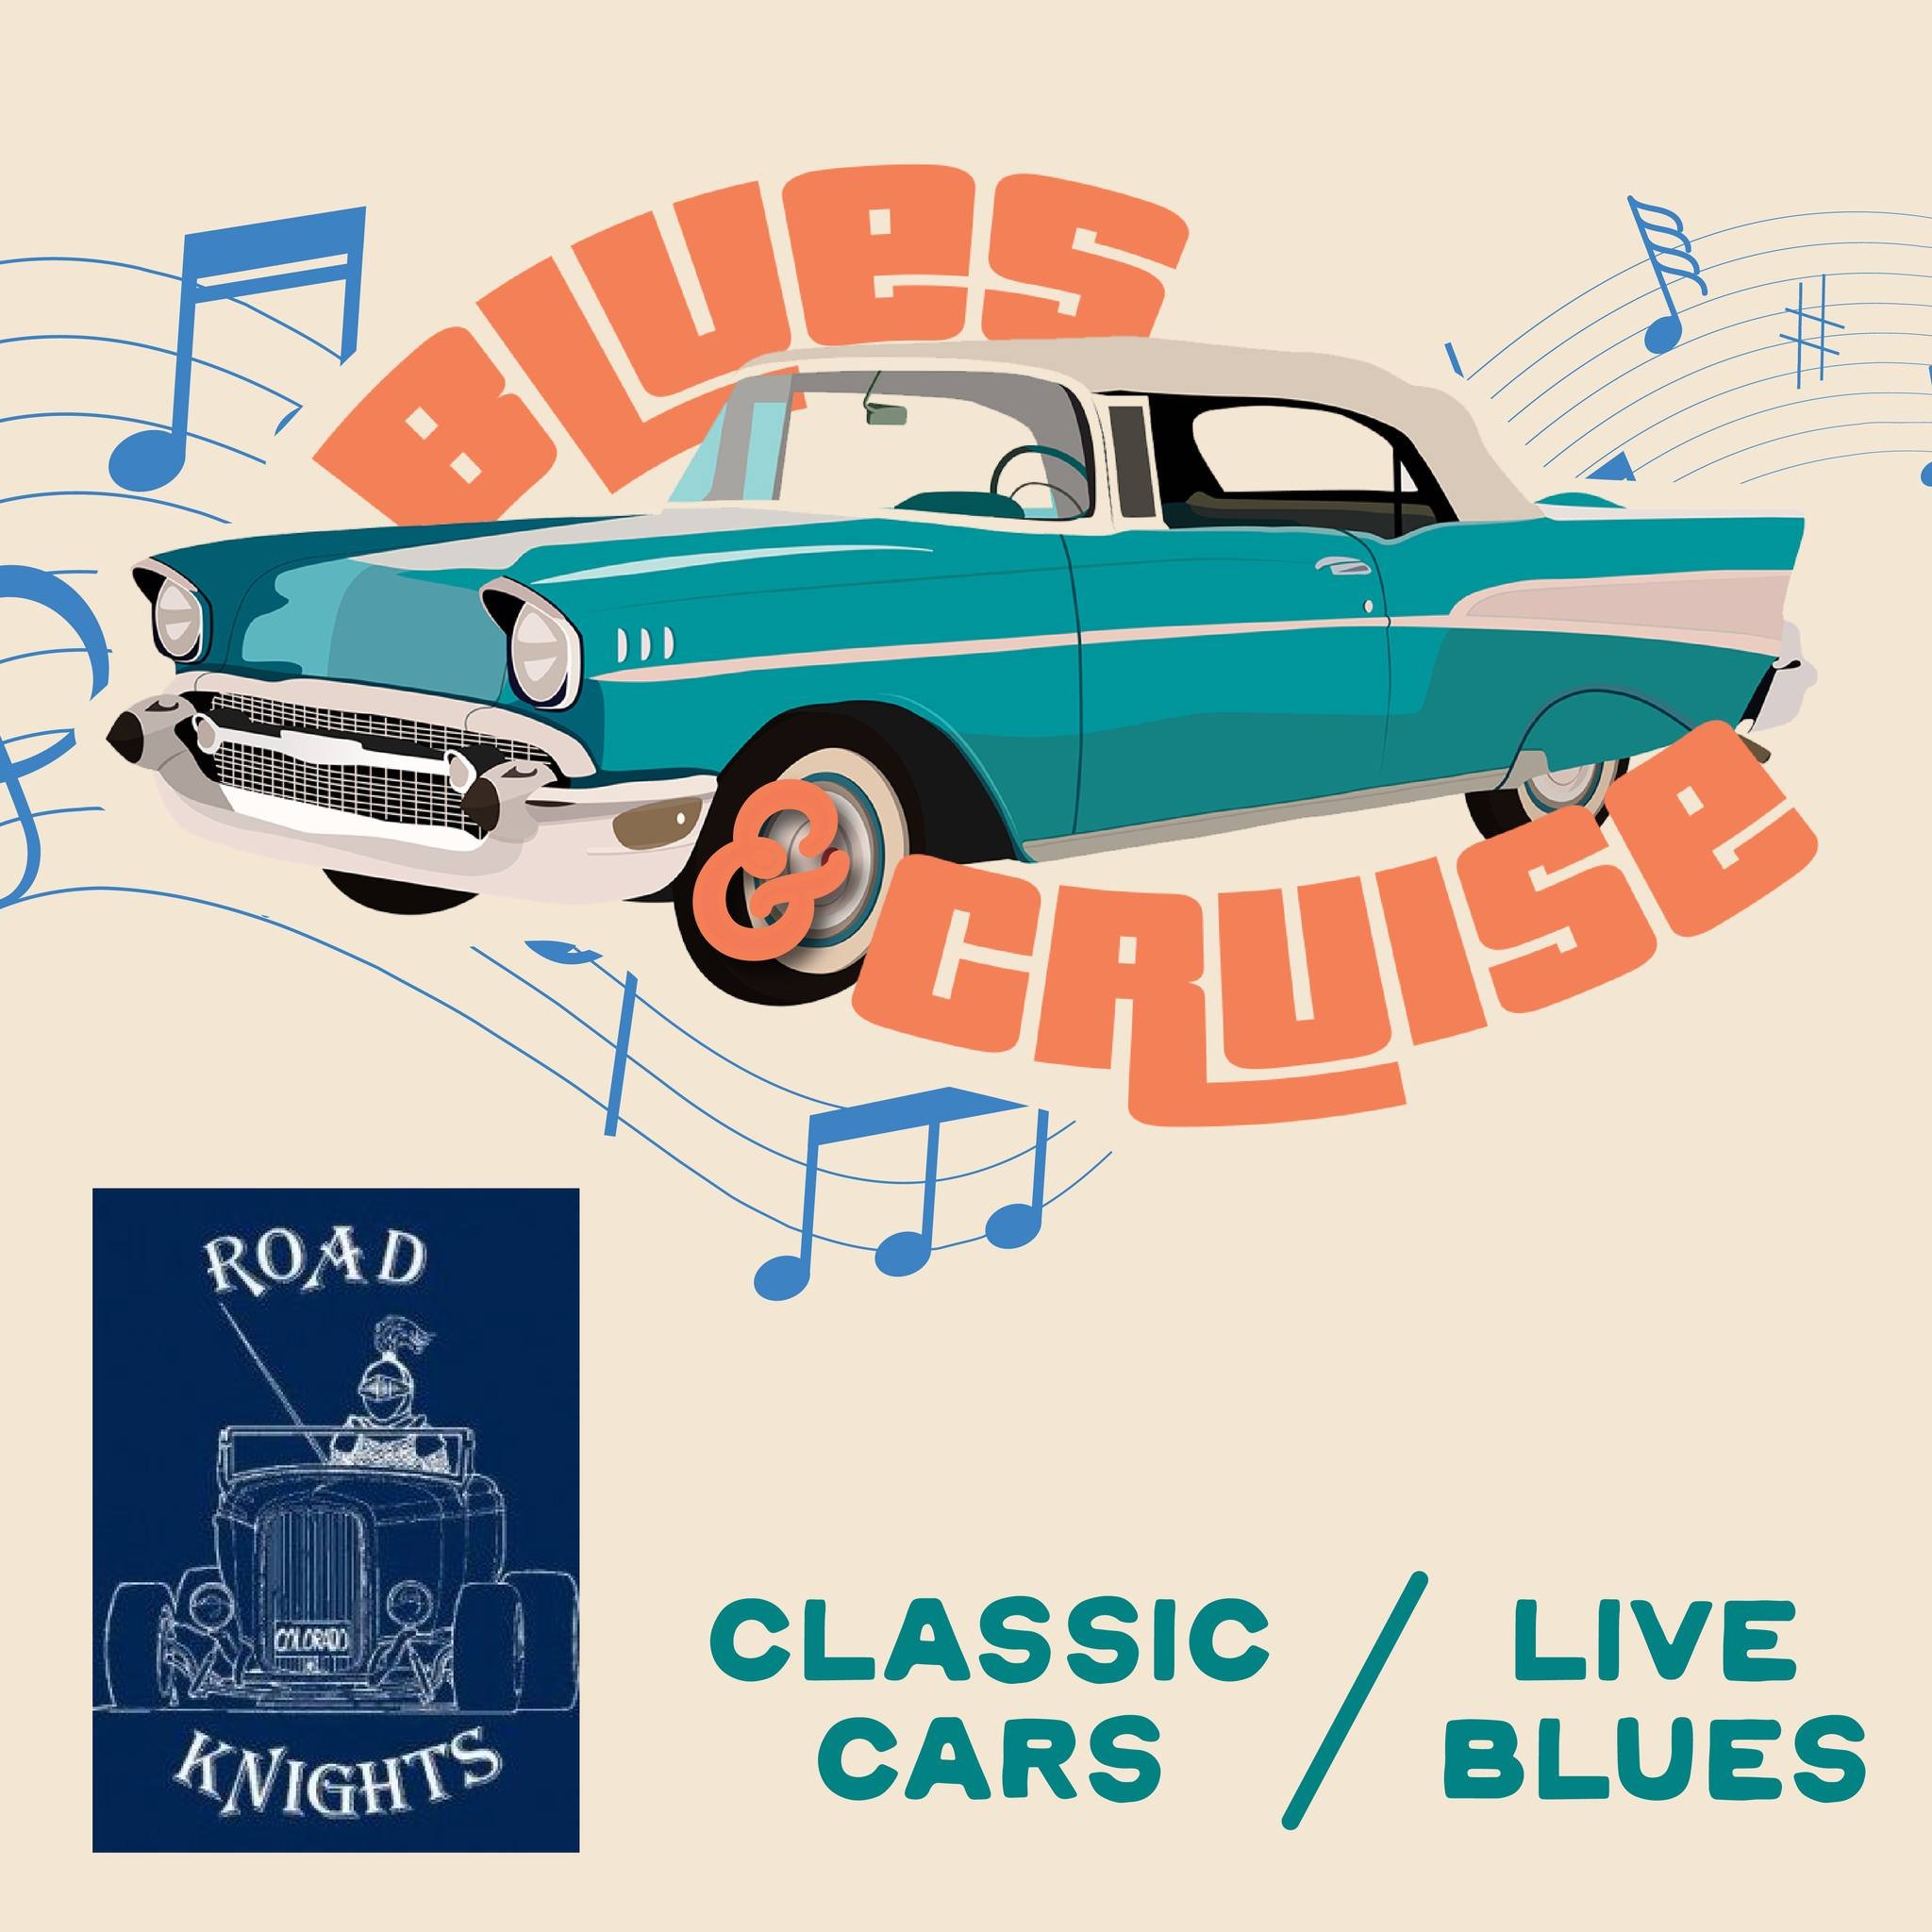 A shout out to our car partner for this weekend's Blues &amp; Cruise event, Road Knights Car Club of Colorado 👏
The Road Knights are running the car-portion of this event and they will be accepting classic cars prior to 1980 models.  Due to space an